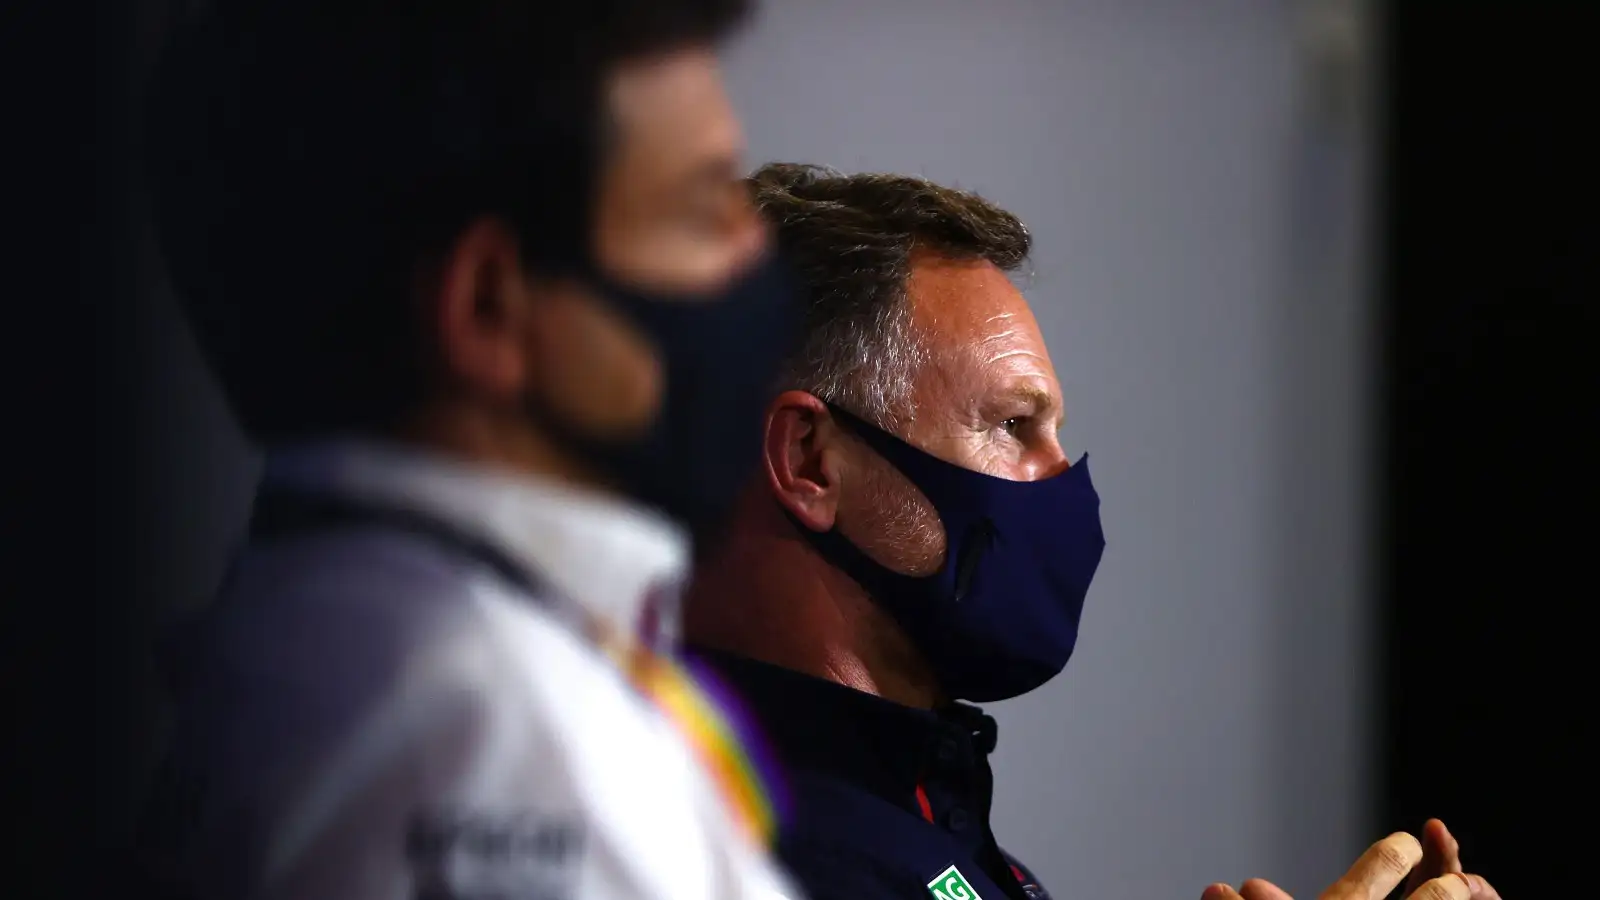 Toto Wolff, Mercedes, and Christian Horner, Red Bull, talk to media. England, July 2021.